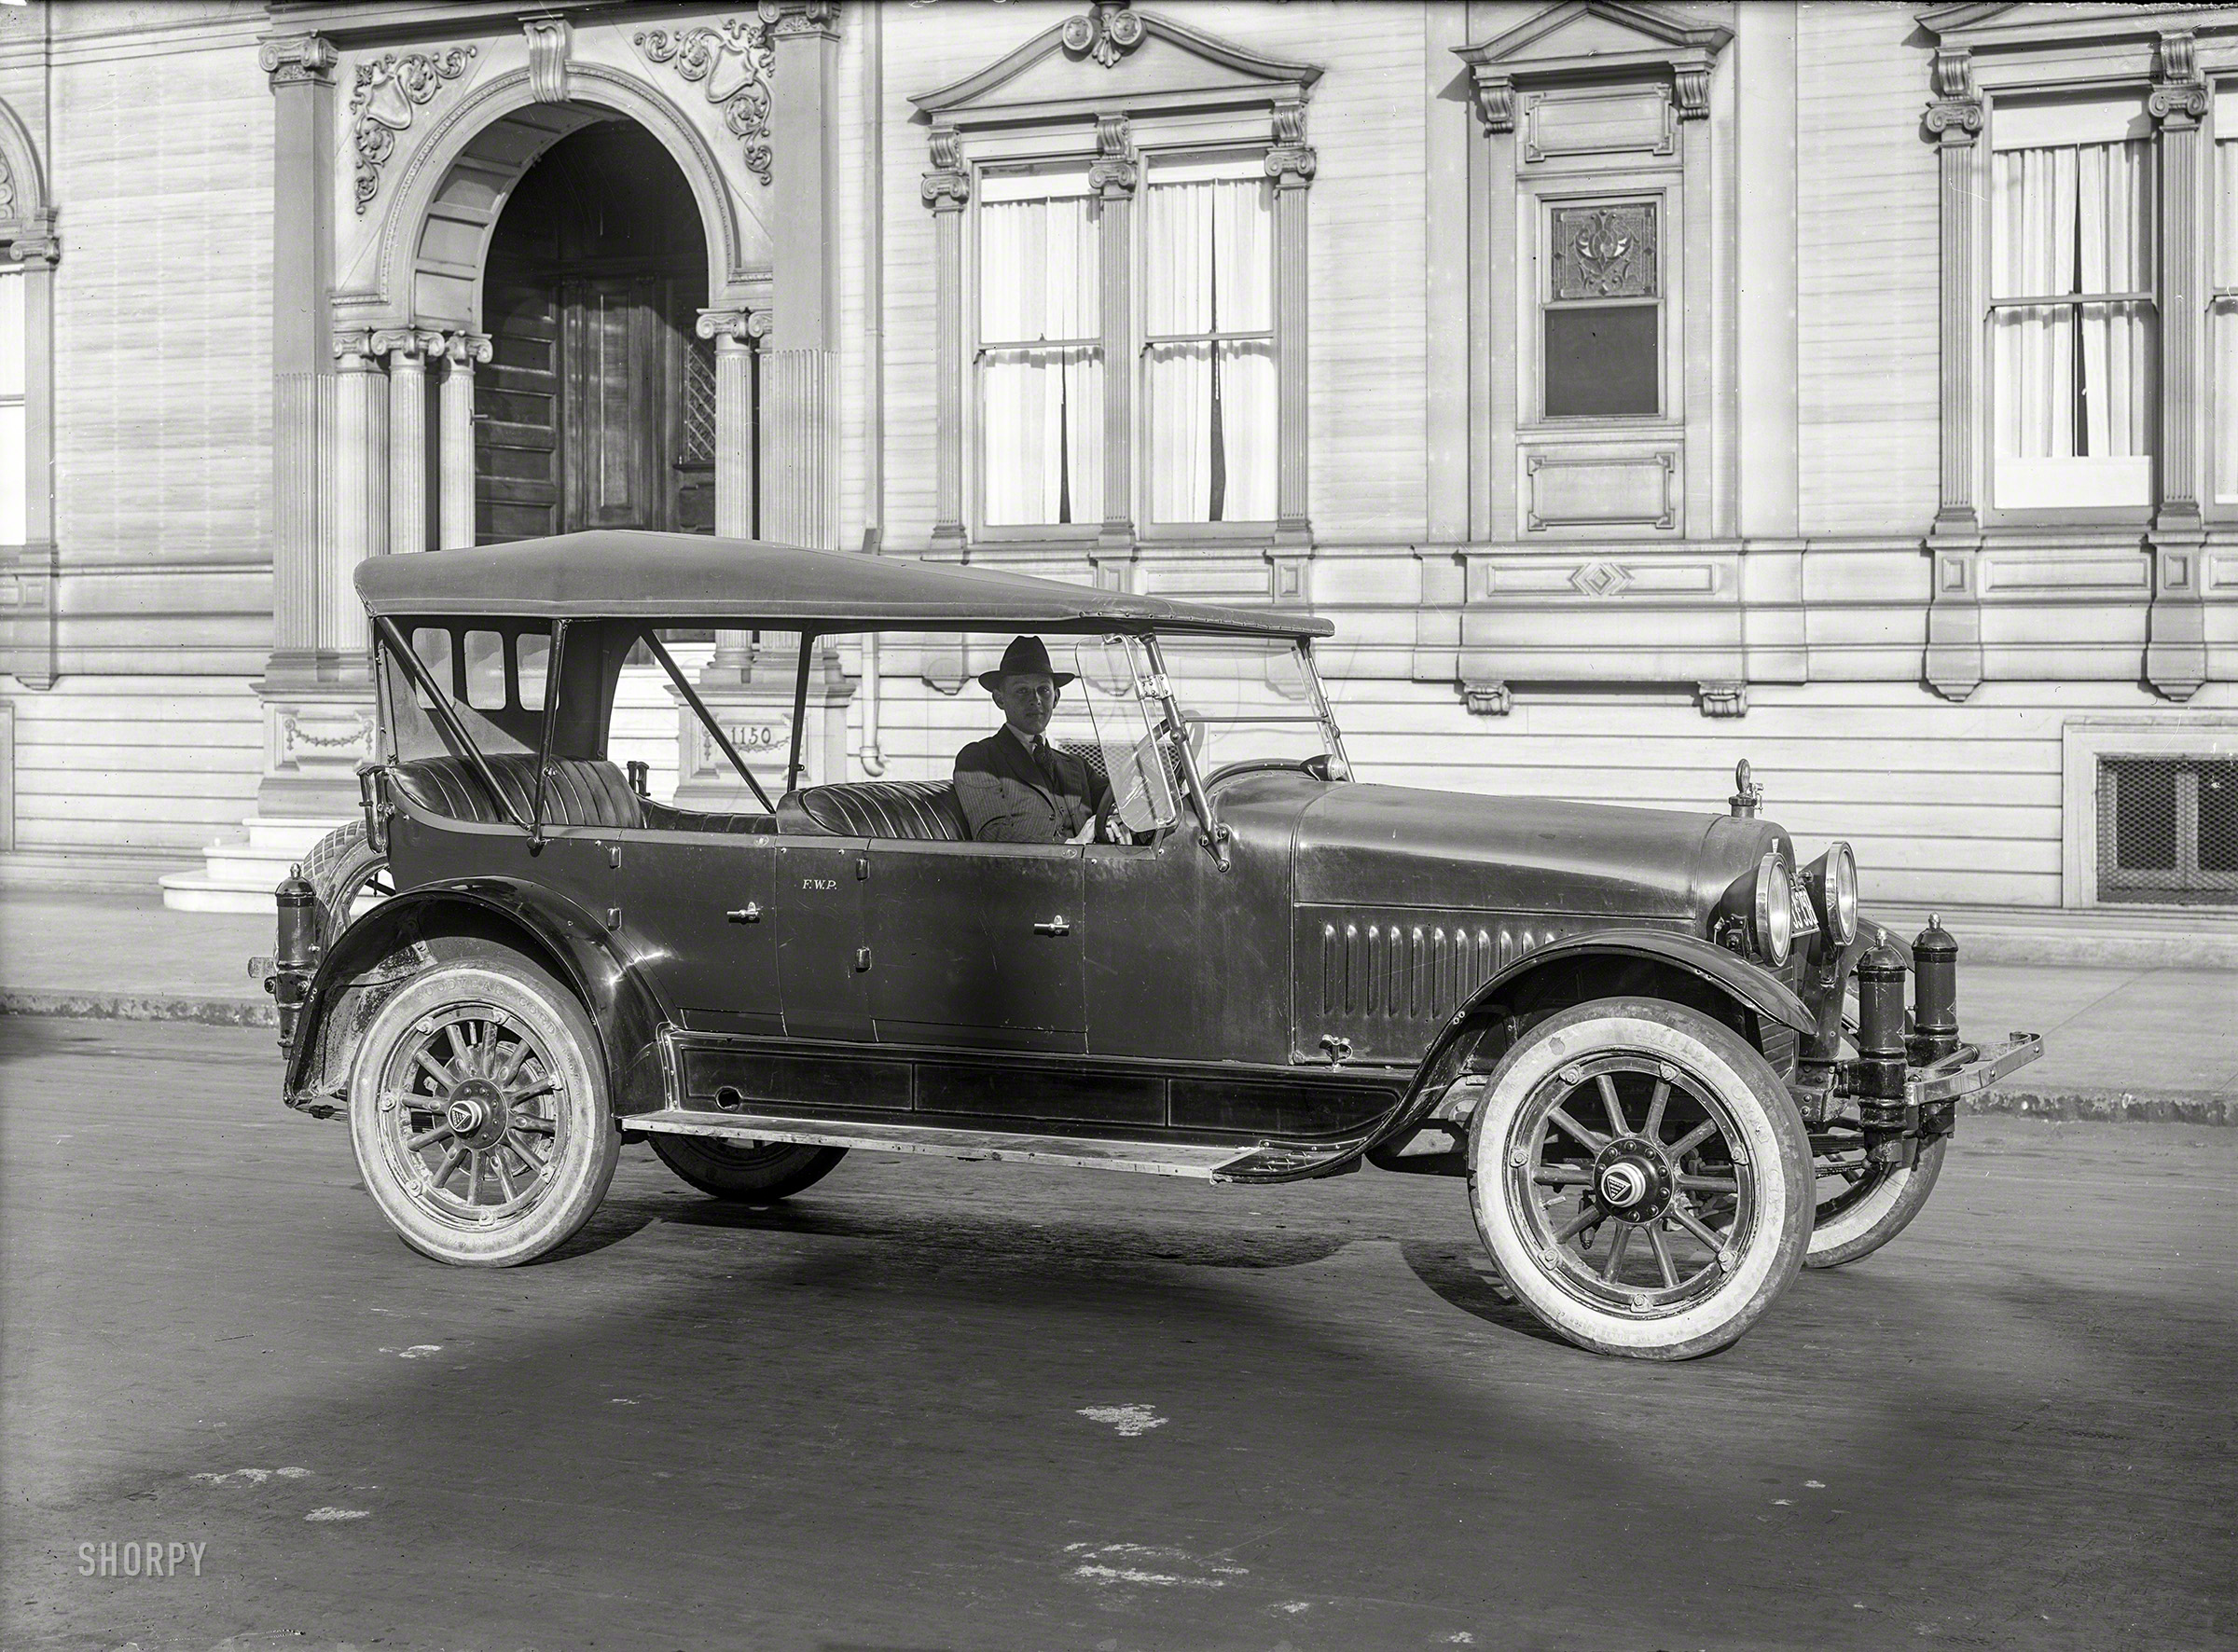 "San Francisco, 1920. Hudson touring car." Owned by F.W.P., idling in front of the imposing edifice at 1150 Anonymous Avenue. 5x7 glass negative. View full size.